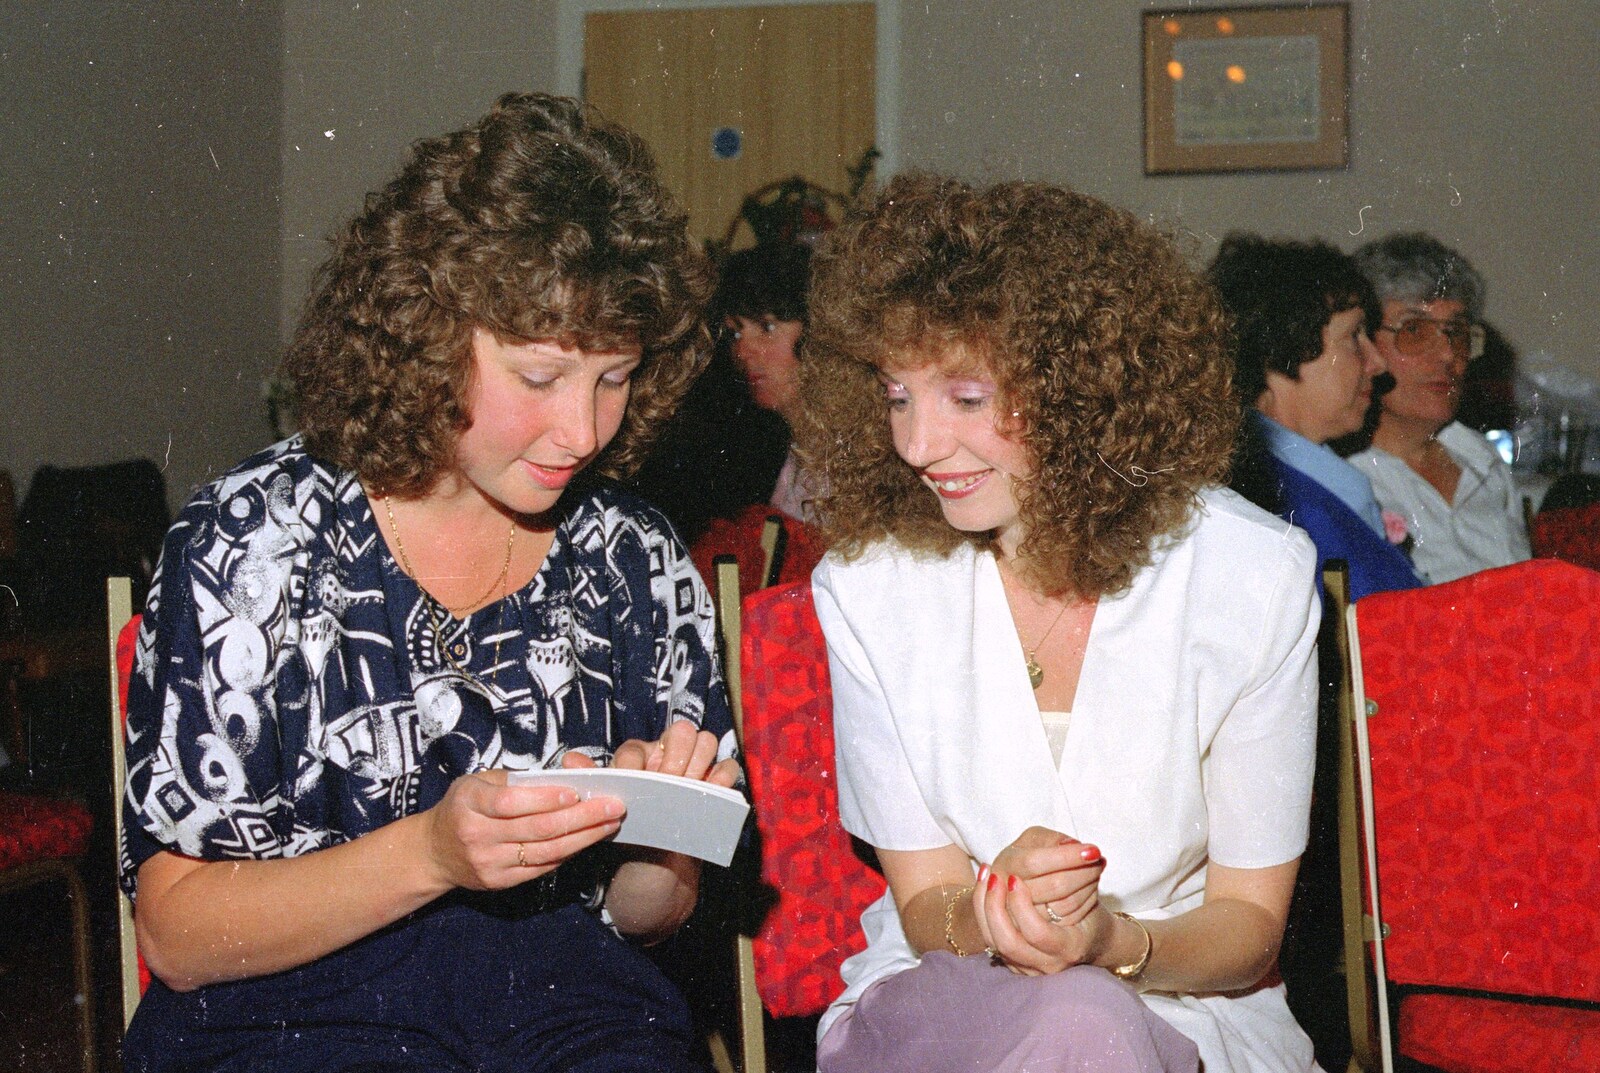 Alison and Monique read cards from Printec Kelly's Wedding, Eye, Suffolk - 25th April 1992